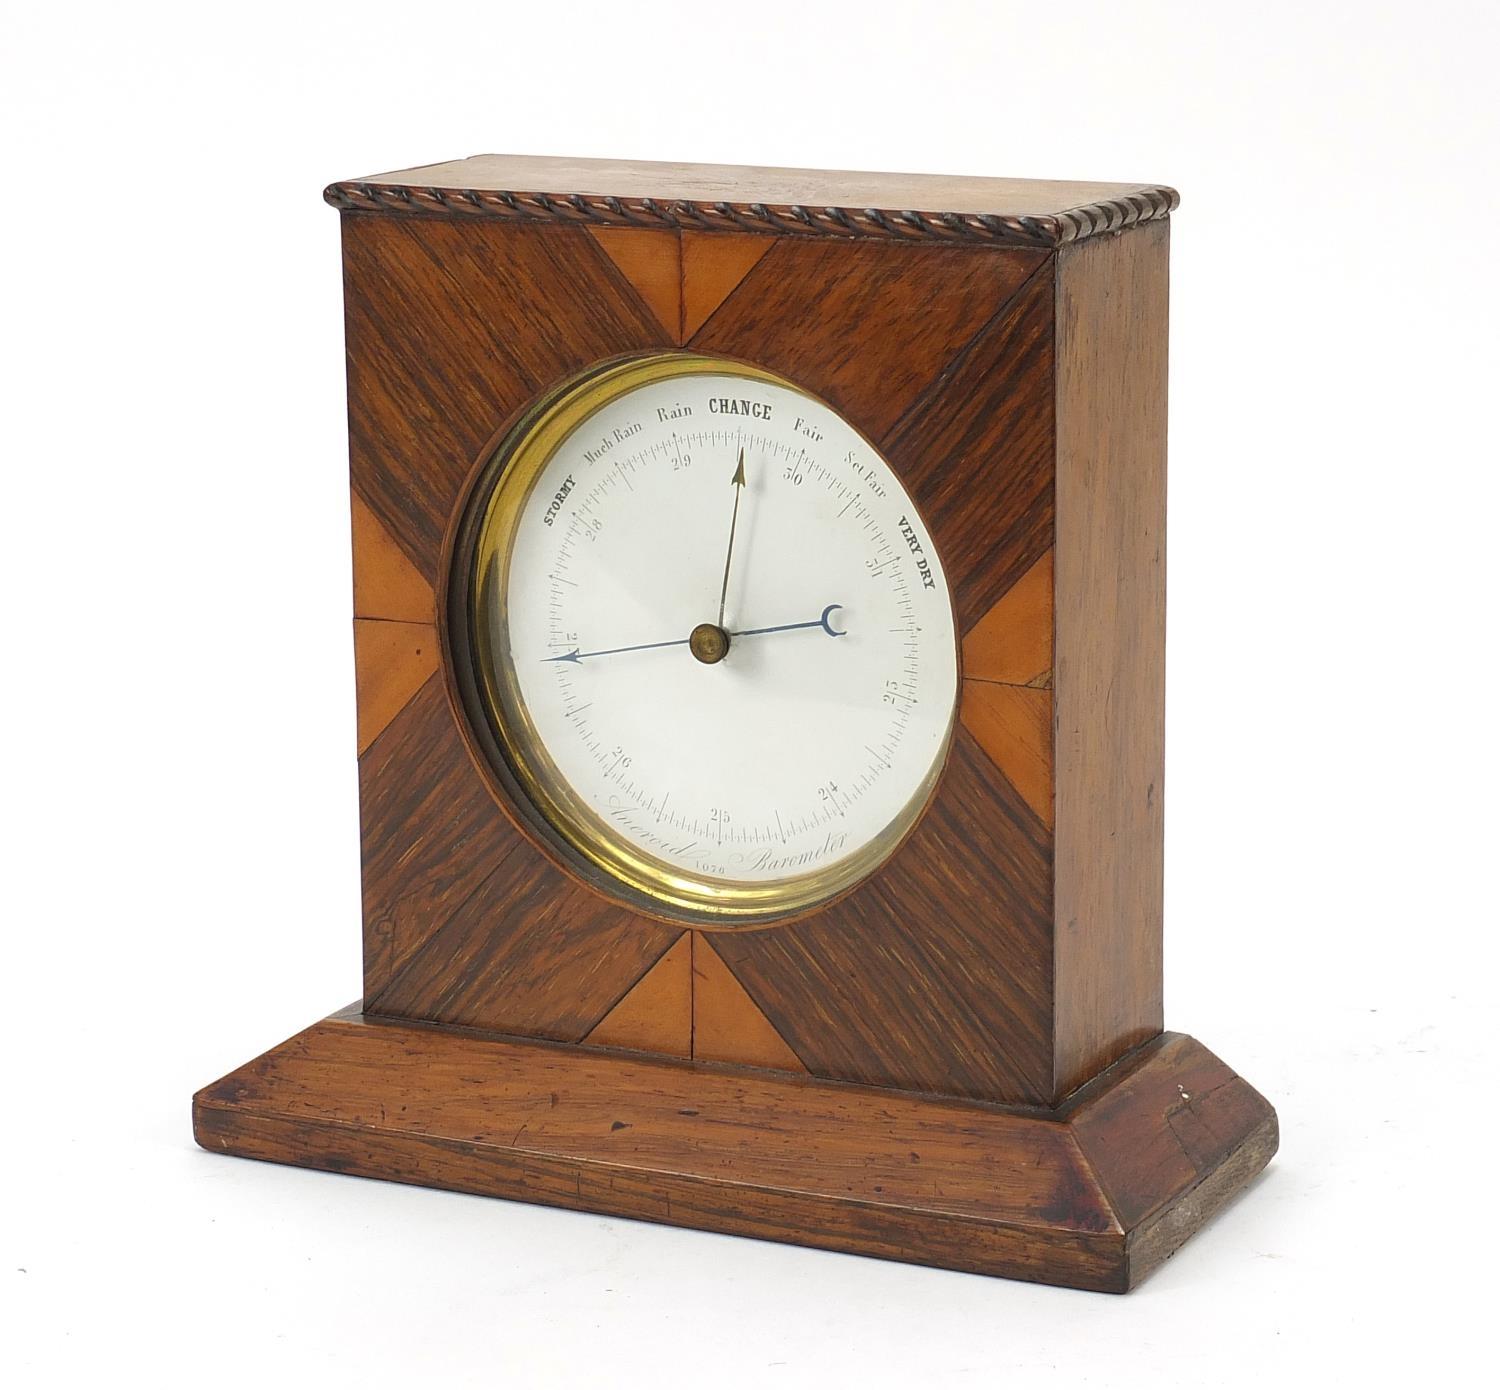 19th century brass cased aneroid barometer with enamelled dial housed in a satinwood and rosewood